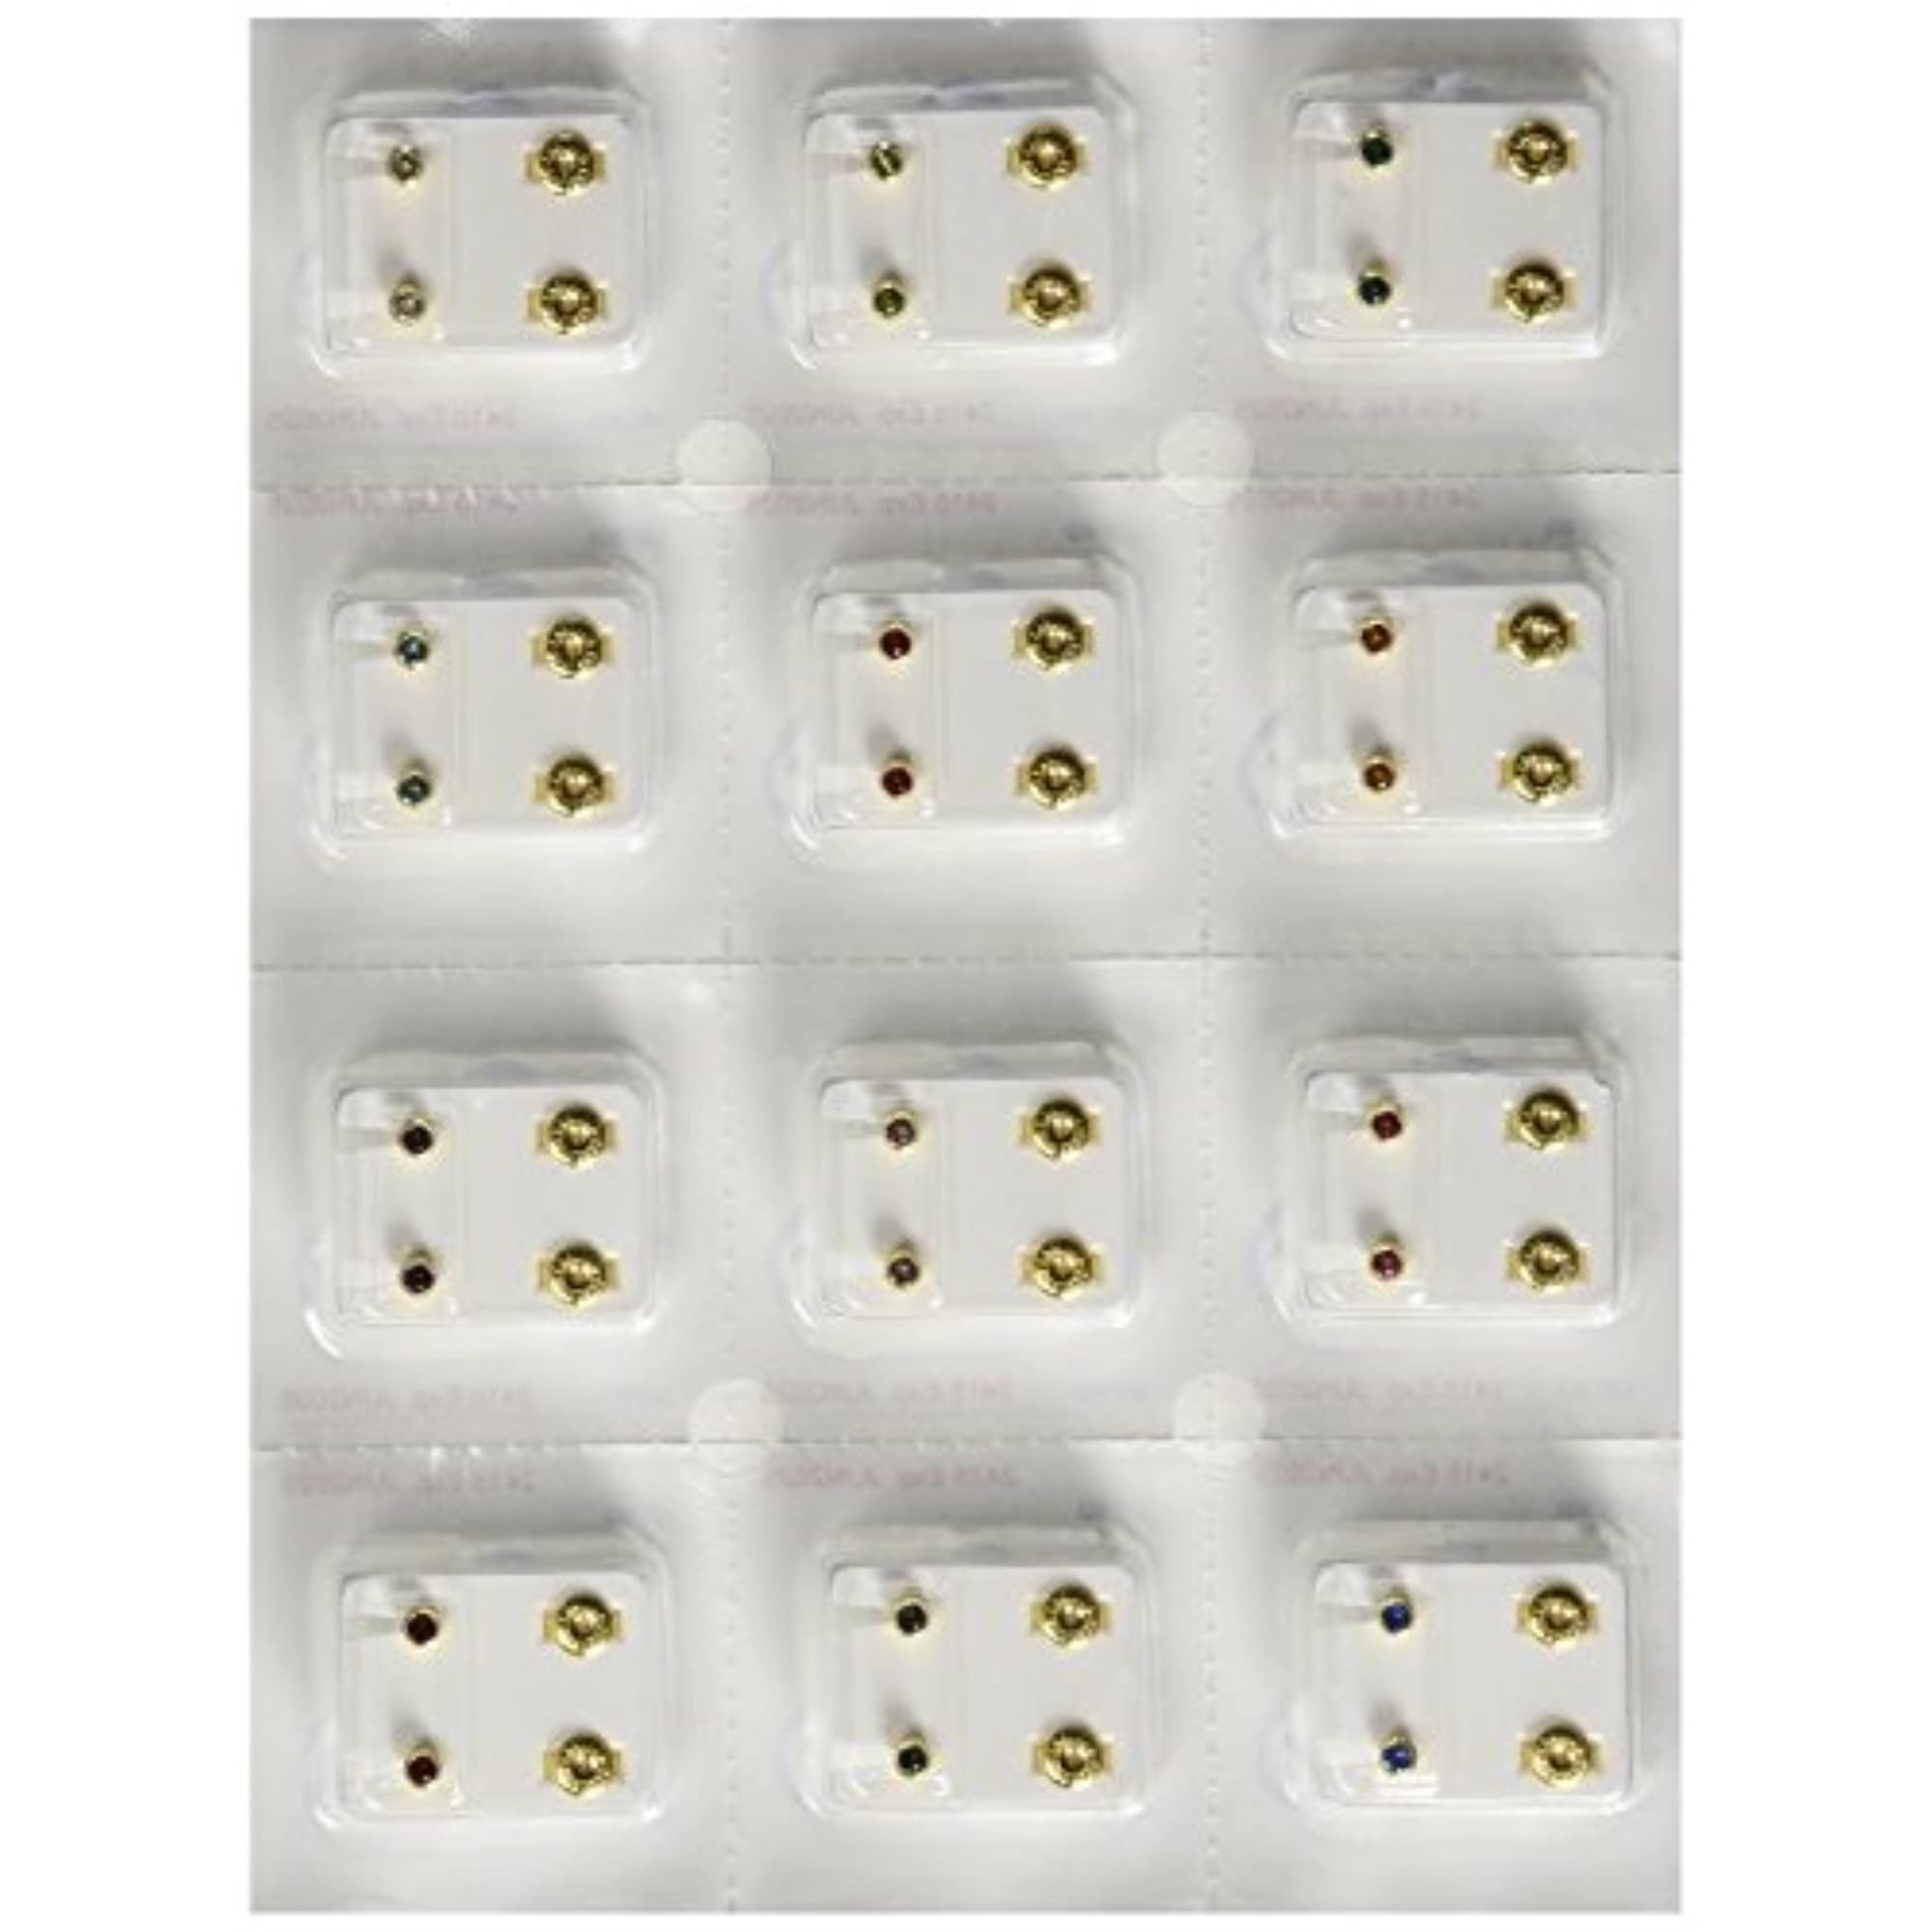 Surgical Steel 4mm Ear Piercing Studs, 12 Pair Mixed Colors